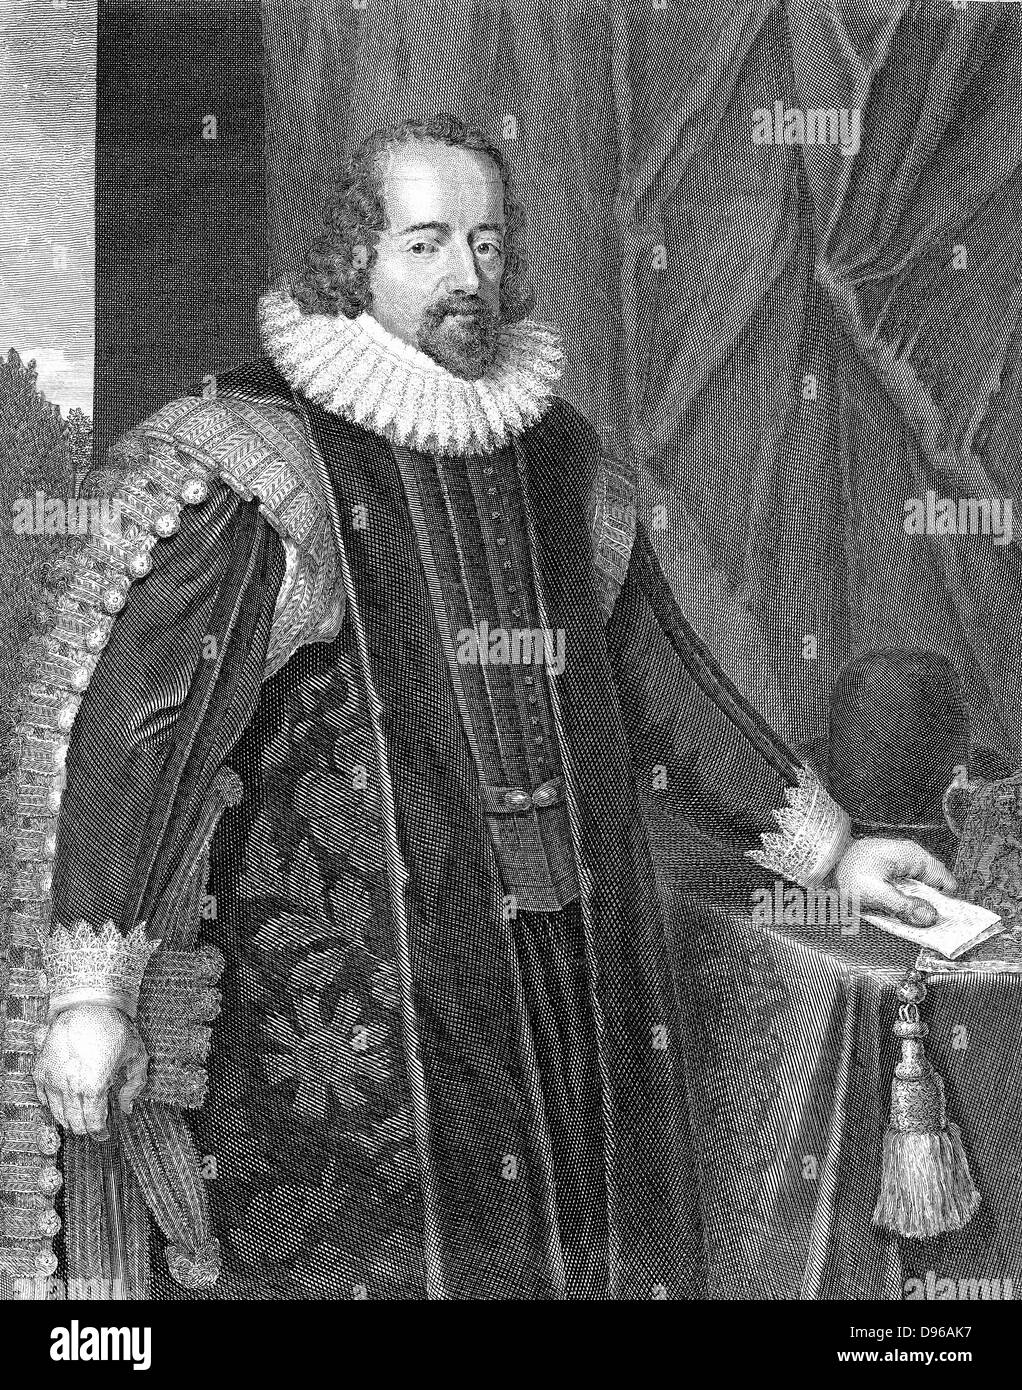 Francis Bacon (1561-1626) Viscount St Albans. English philosopher, scientist and statesman. Shown here after his appointment as Lord Chancellor (1618). In science advocated observation and experiment rather than Aristotelian deductive logic. Copperplate engraving. Stock Photo